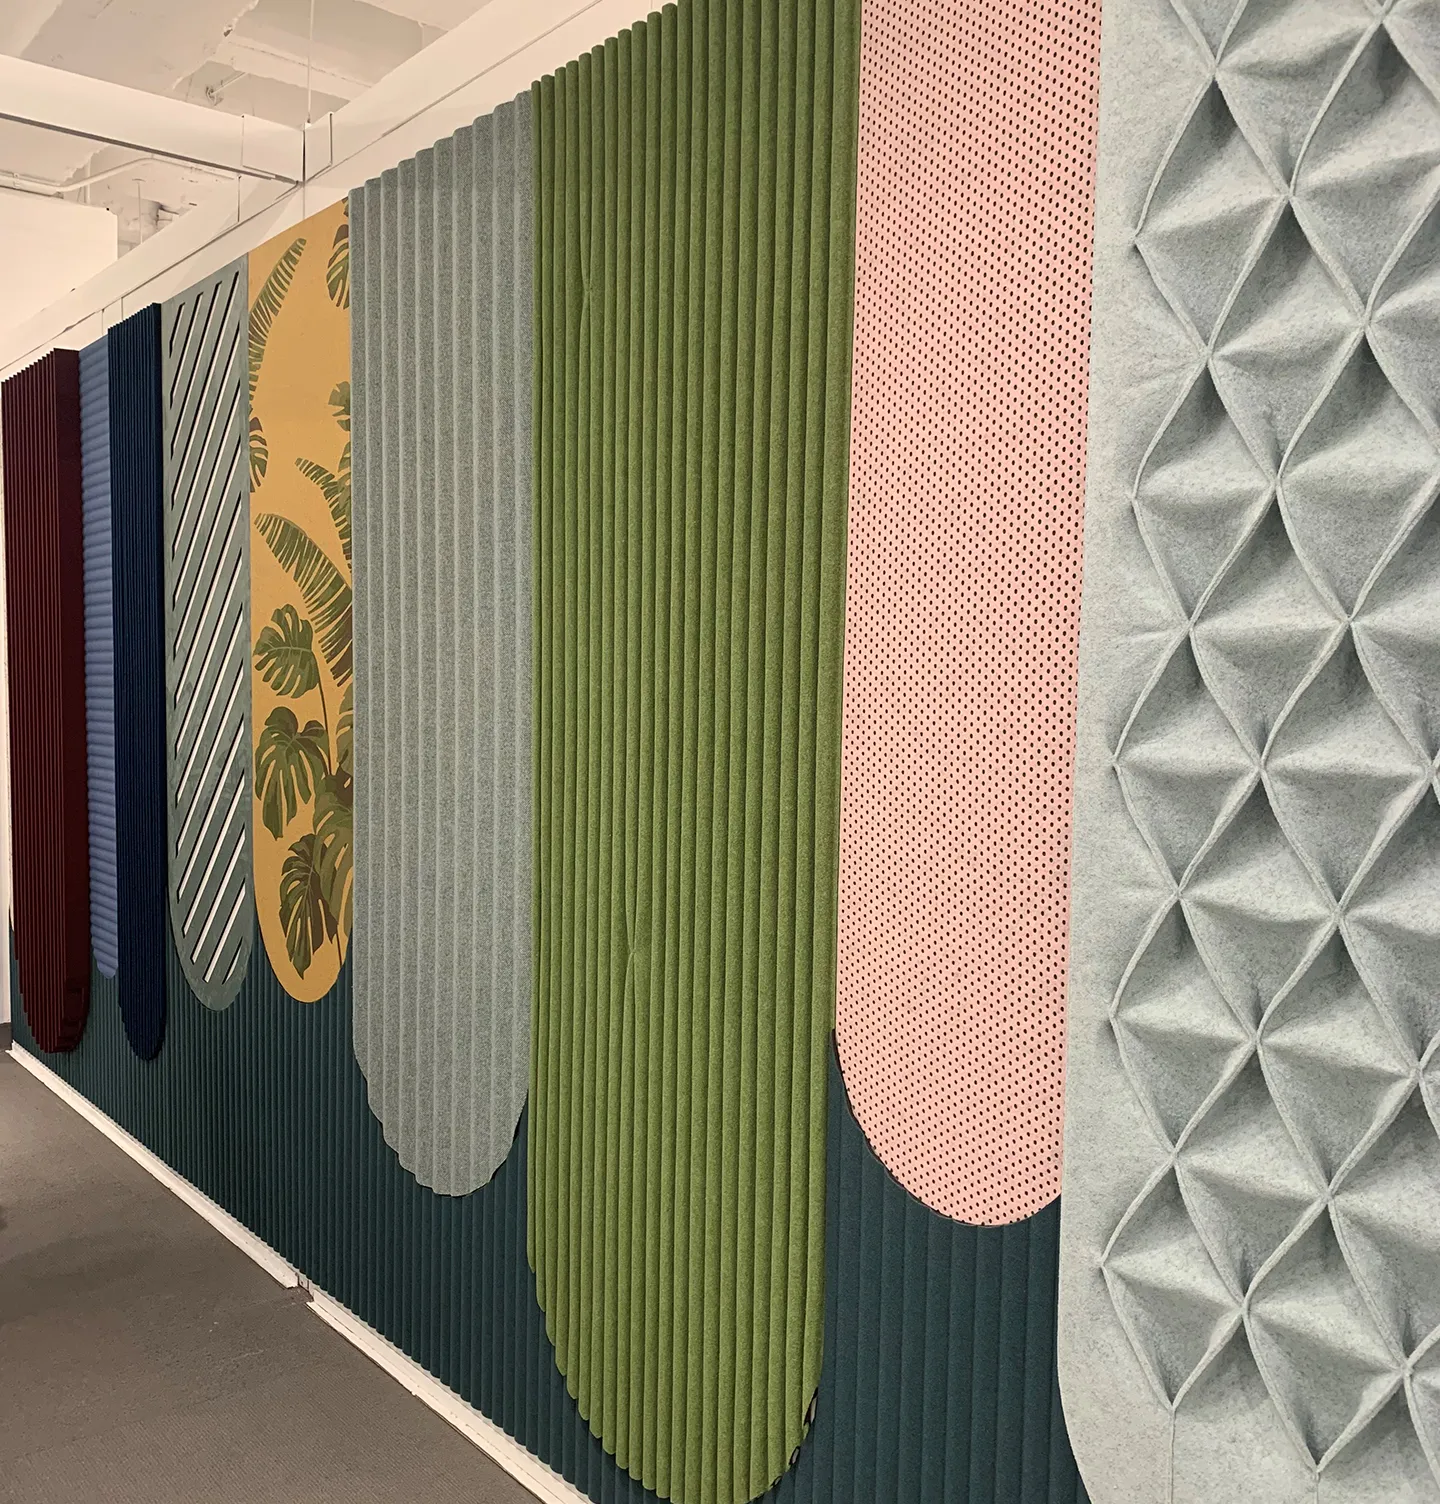 Unique design of acoustic panels through colorful arches and different textures.